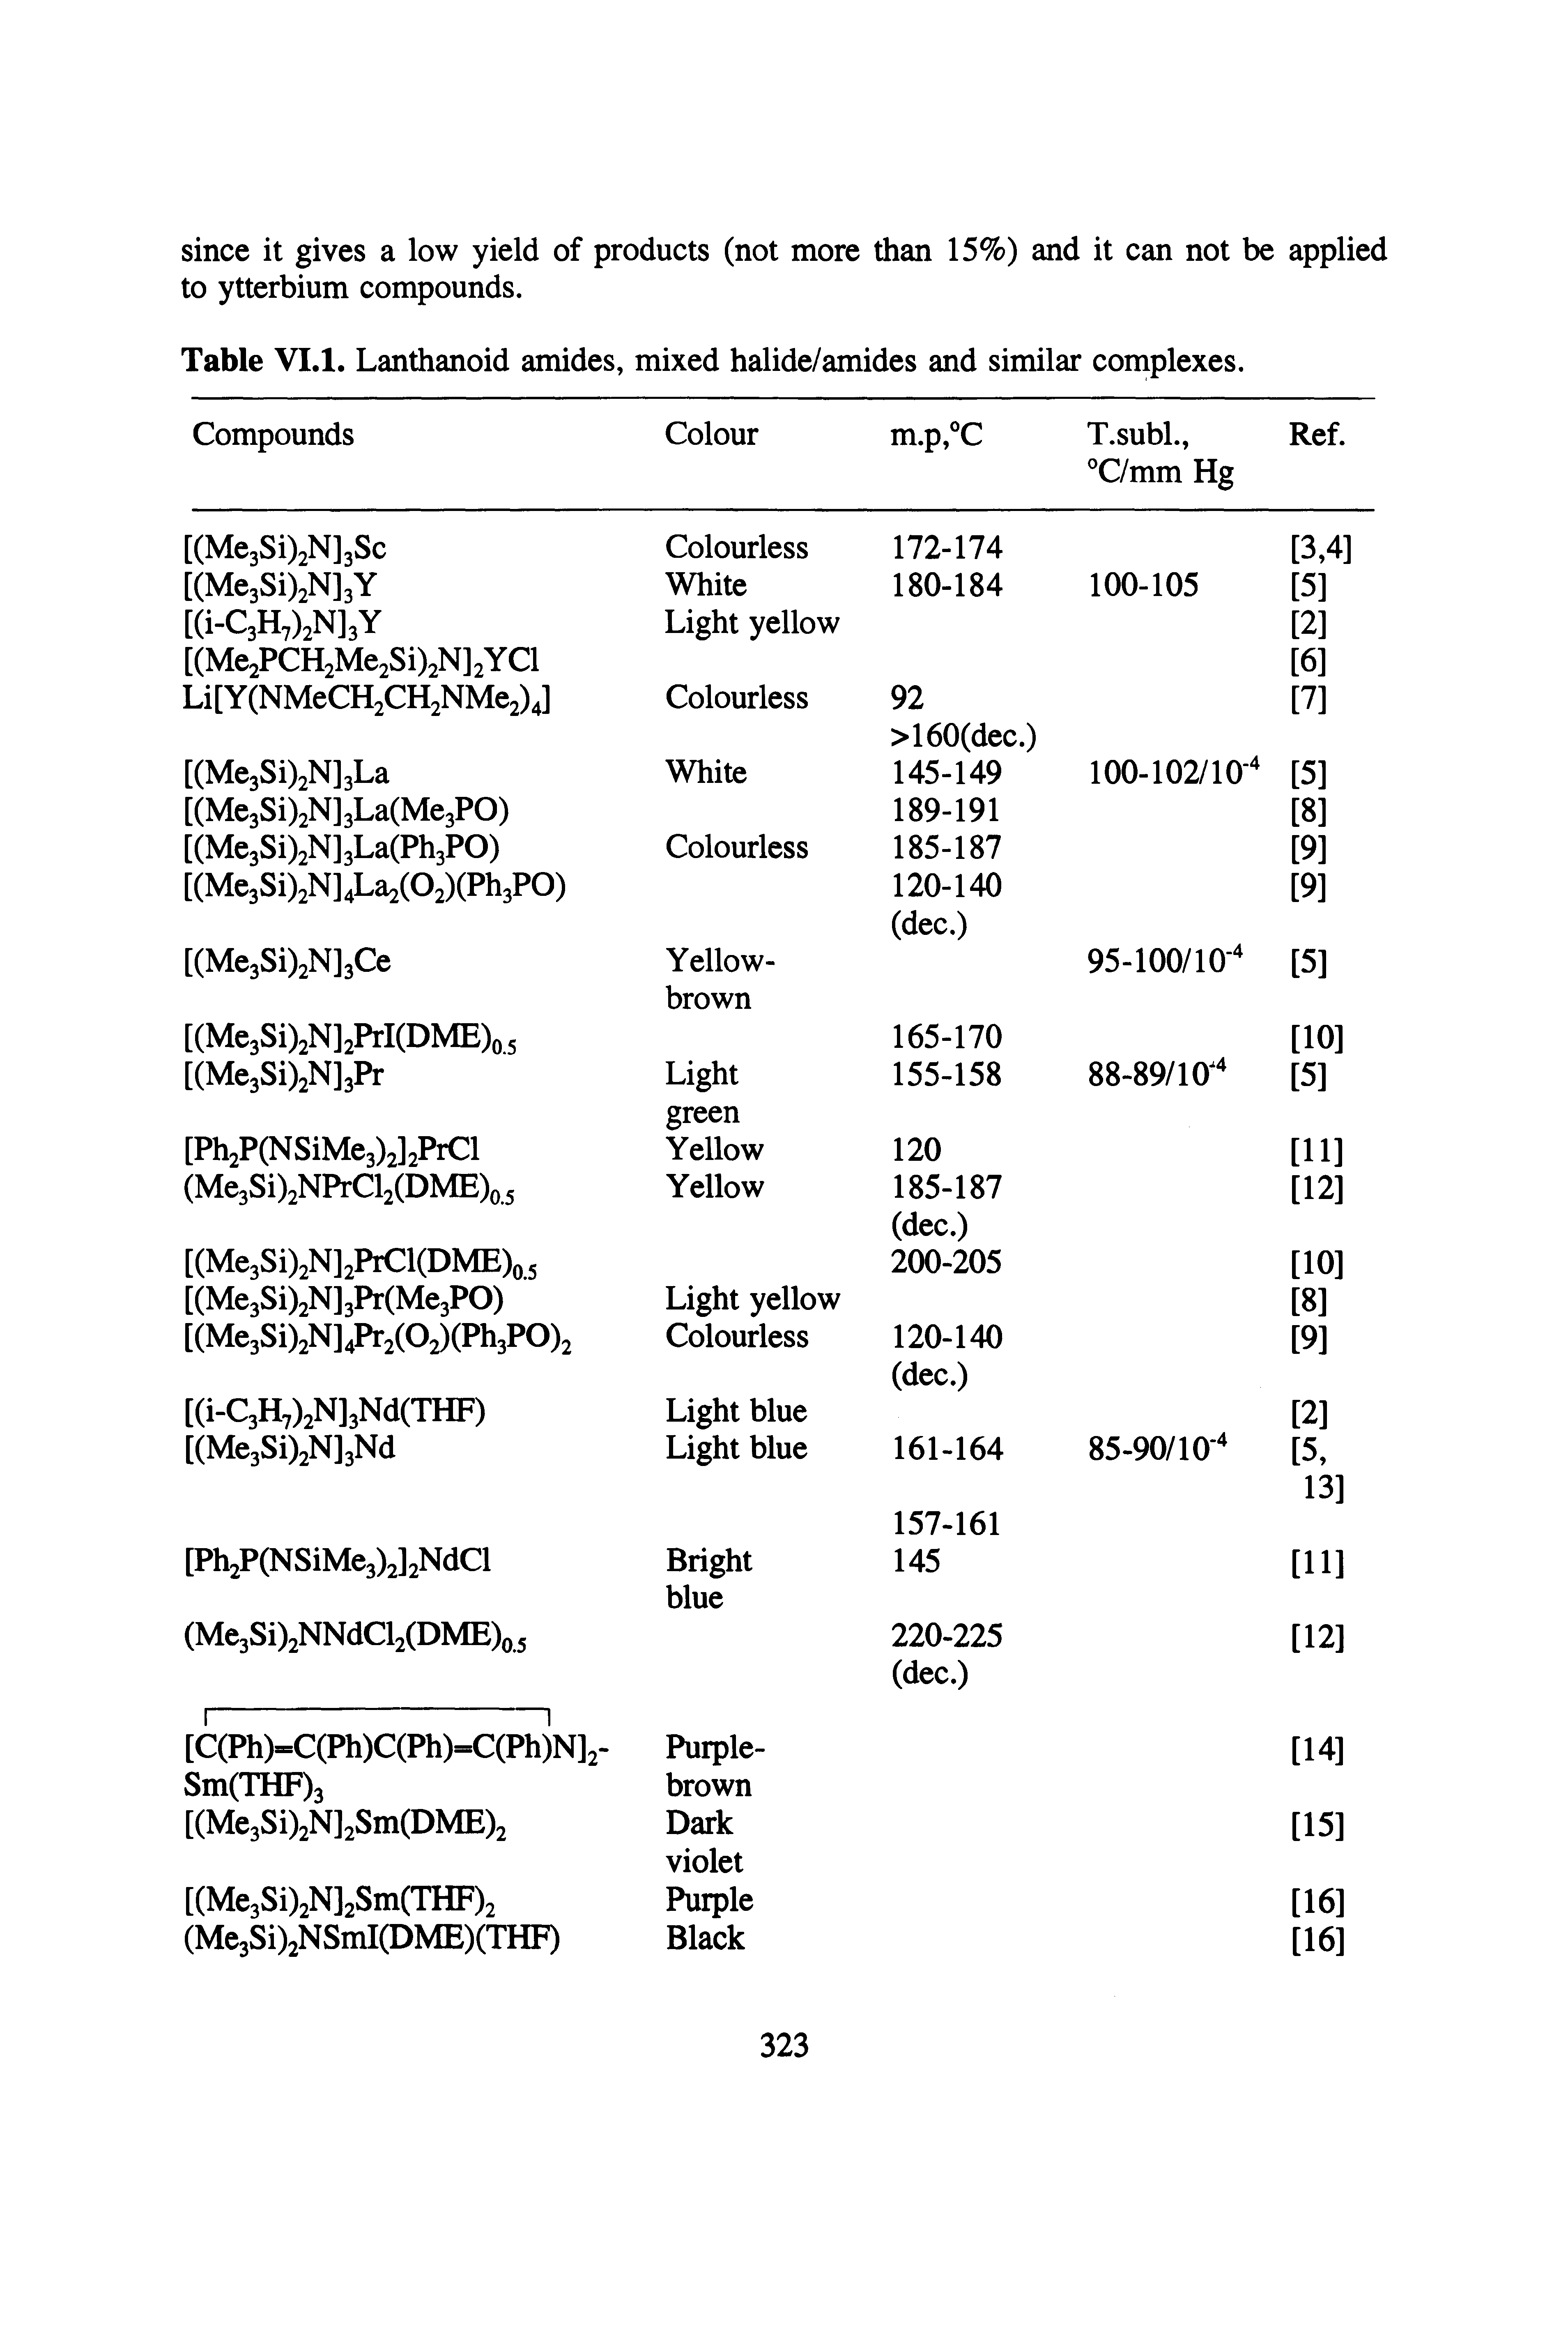 Table VI.l. Lanthanoid amides, mixed halide/amides and similar complexes.